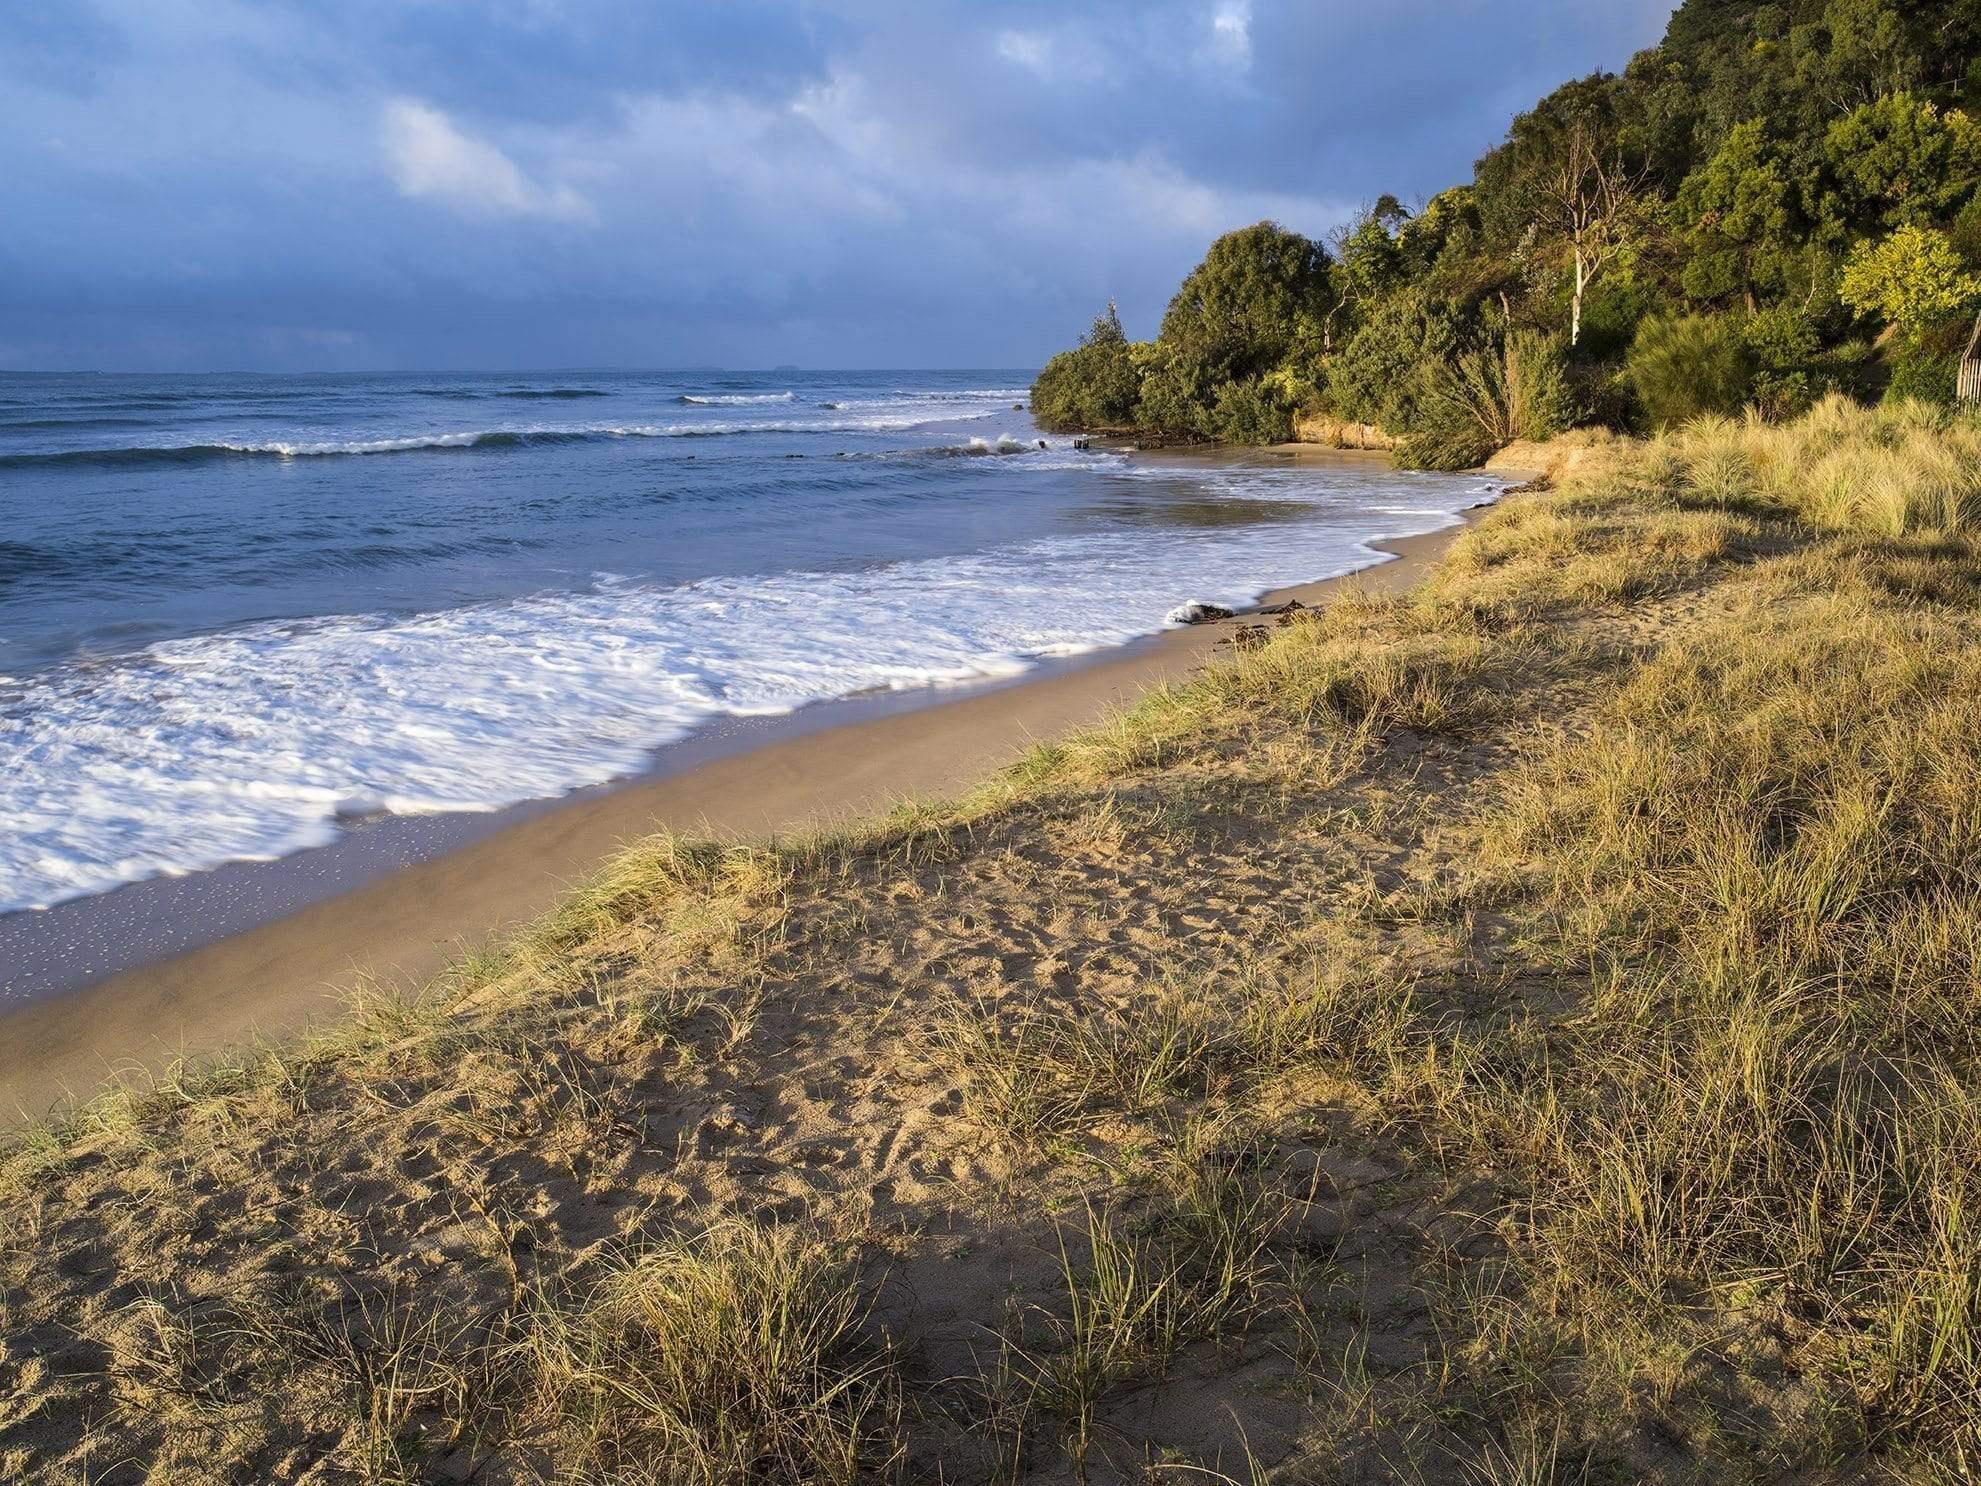 Seashore with small mounts of bushes and grasses, and dense greenery in the top right corner, Balnarring Beach - Mornington Peninsula 